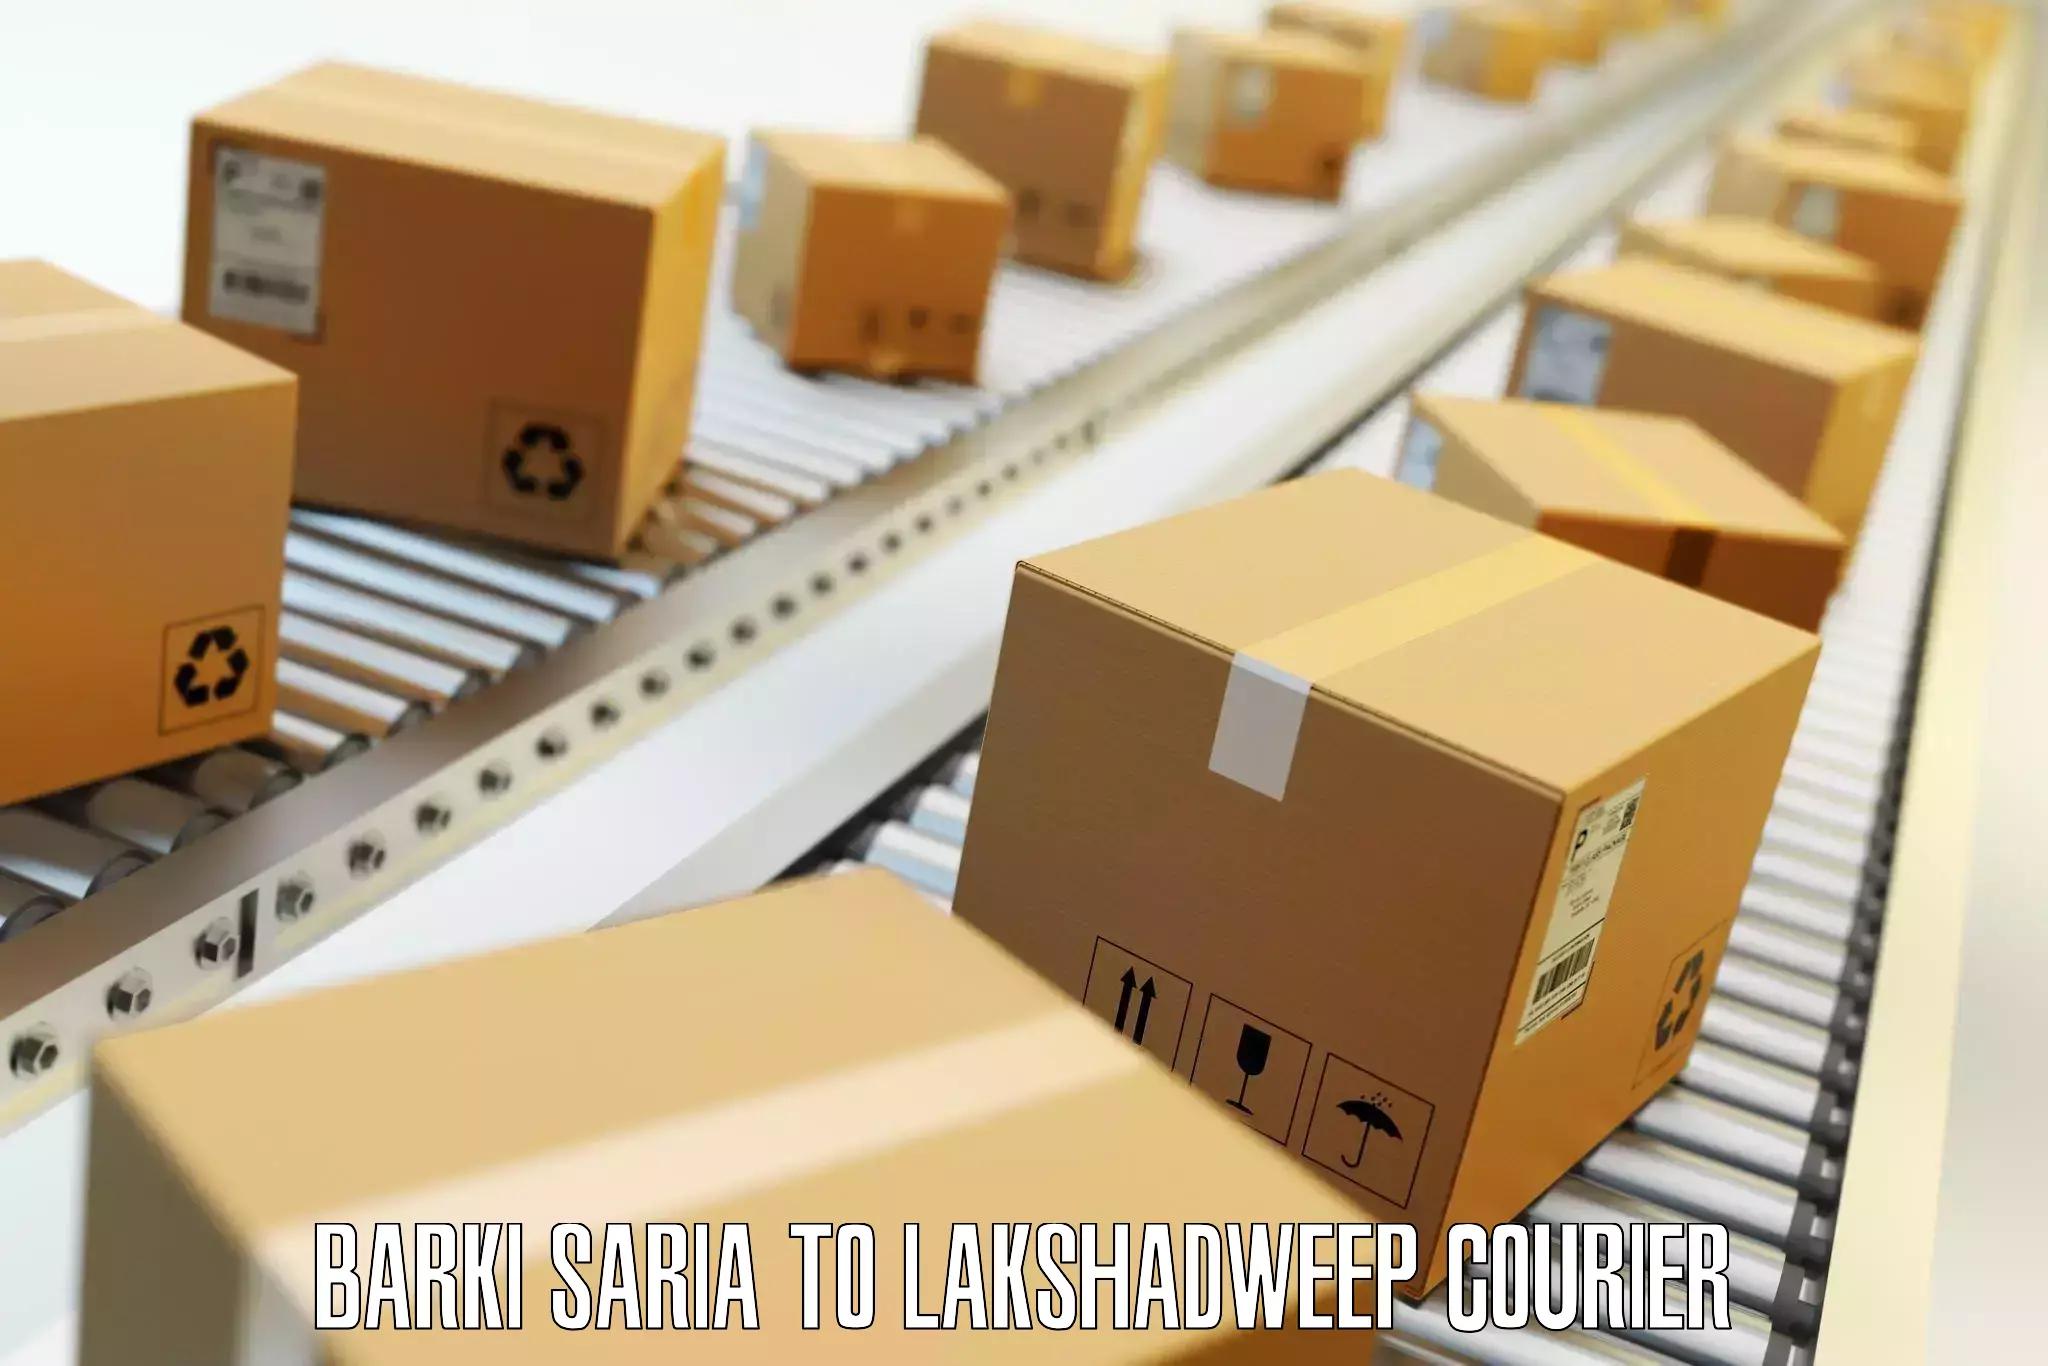 Luggage delivery system Barki Saria to Lakshadweep